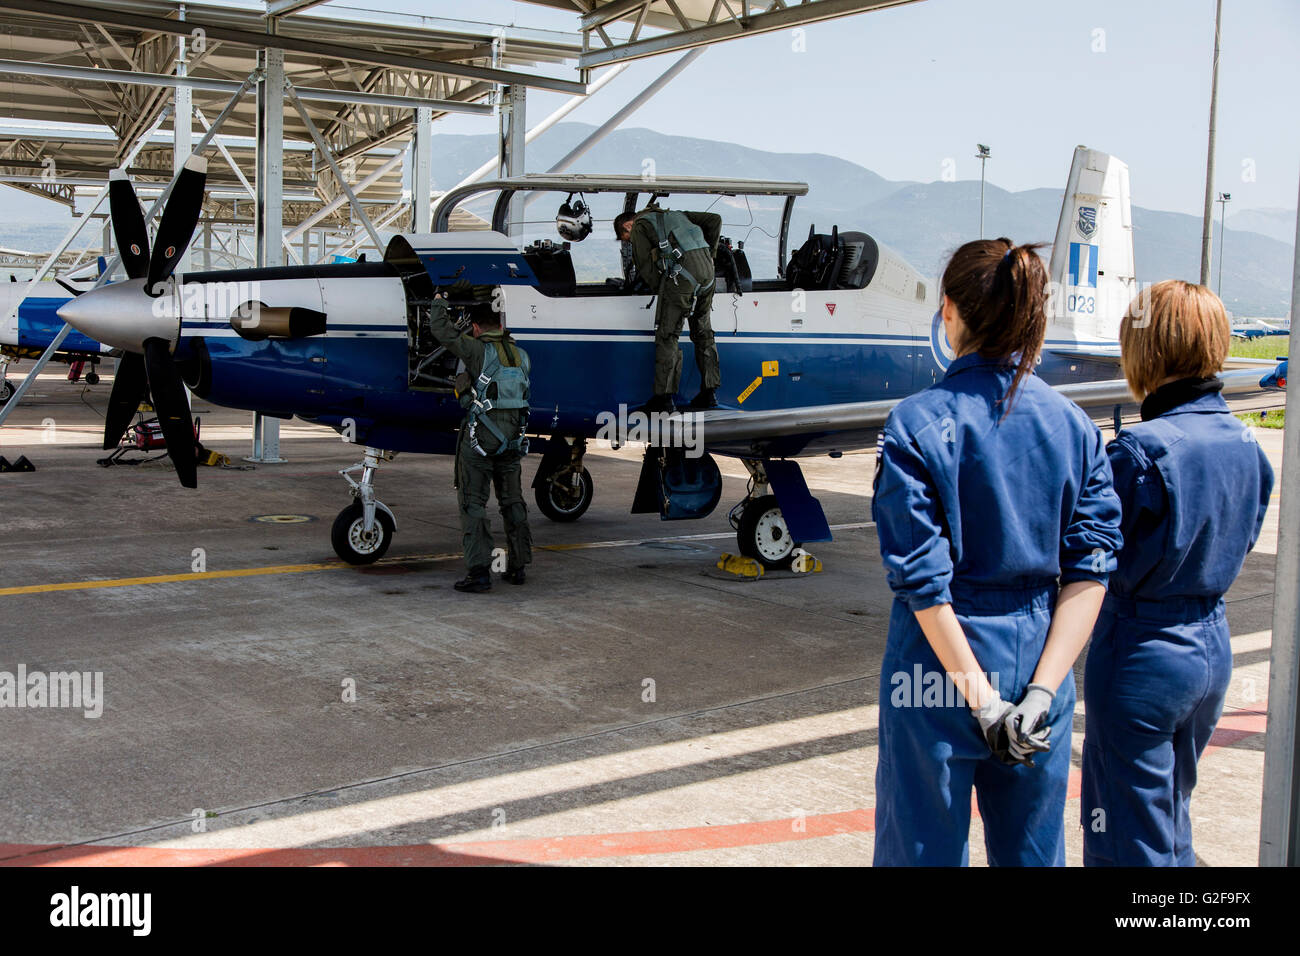 A T-6 Texan trainer of the Hellenic Air Force is readied to fly, Kalamata, Greece. Stock Photo